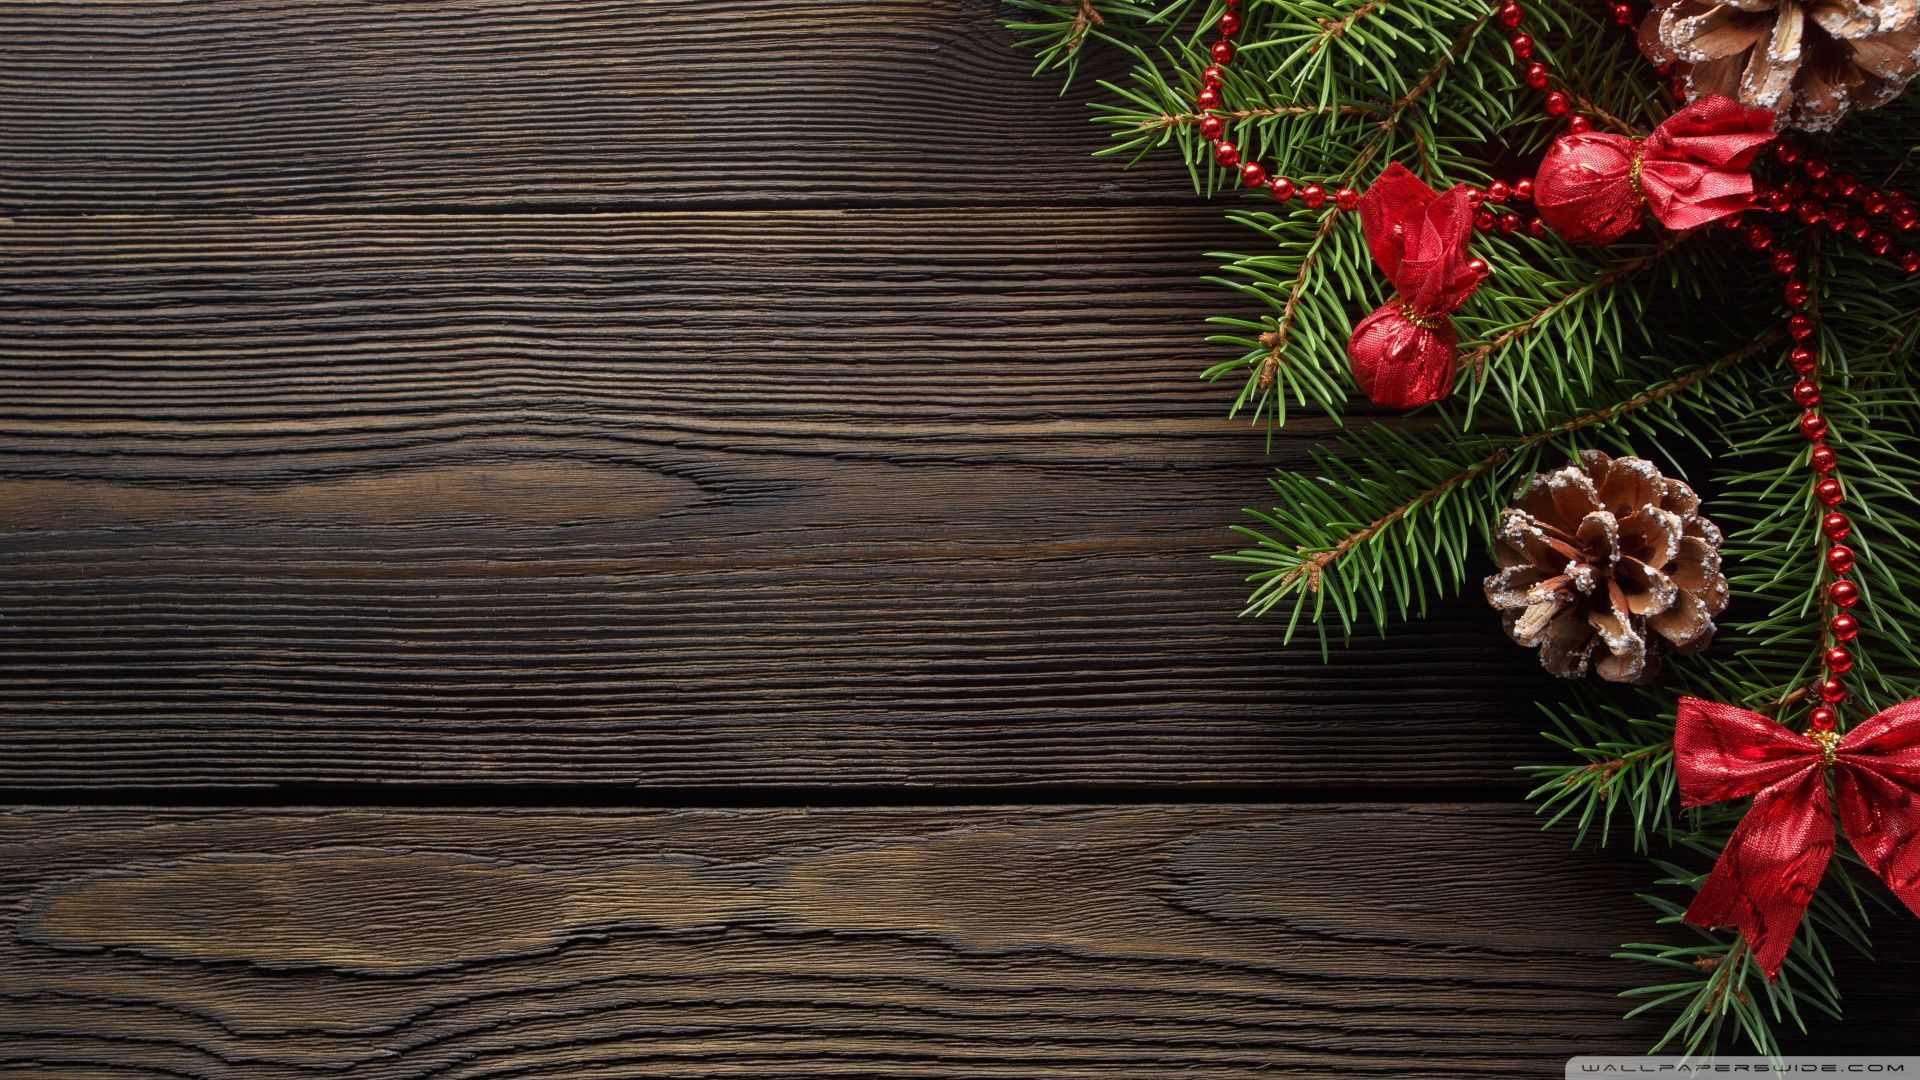 Dark Wood Table With Pine Branch And A Pine Cone. Christmas wallpaper hd, Dark wood table, Christmas wallpaper